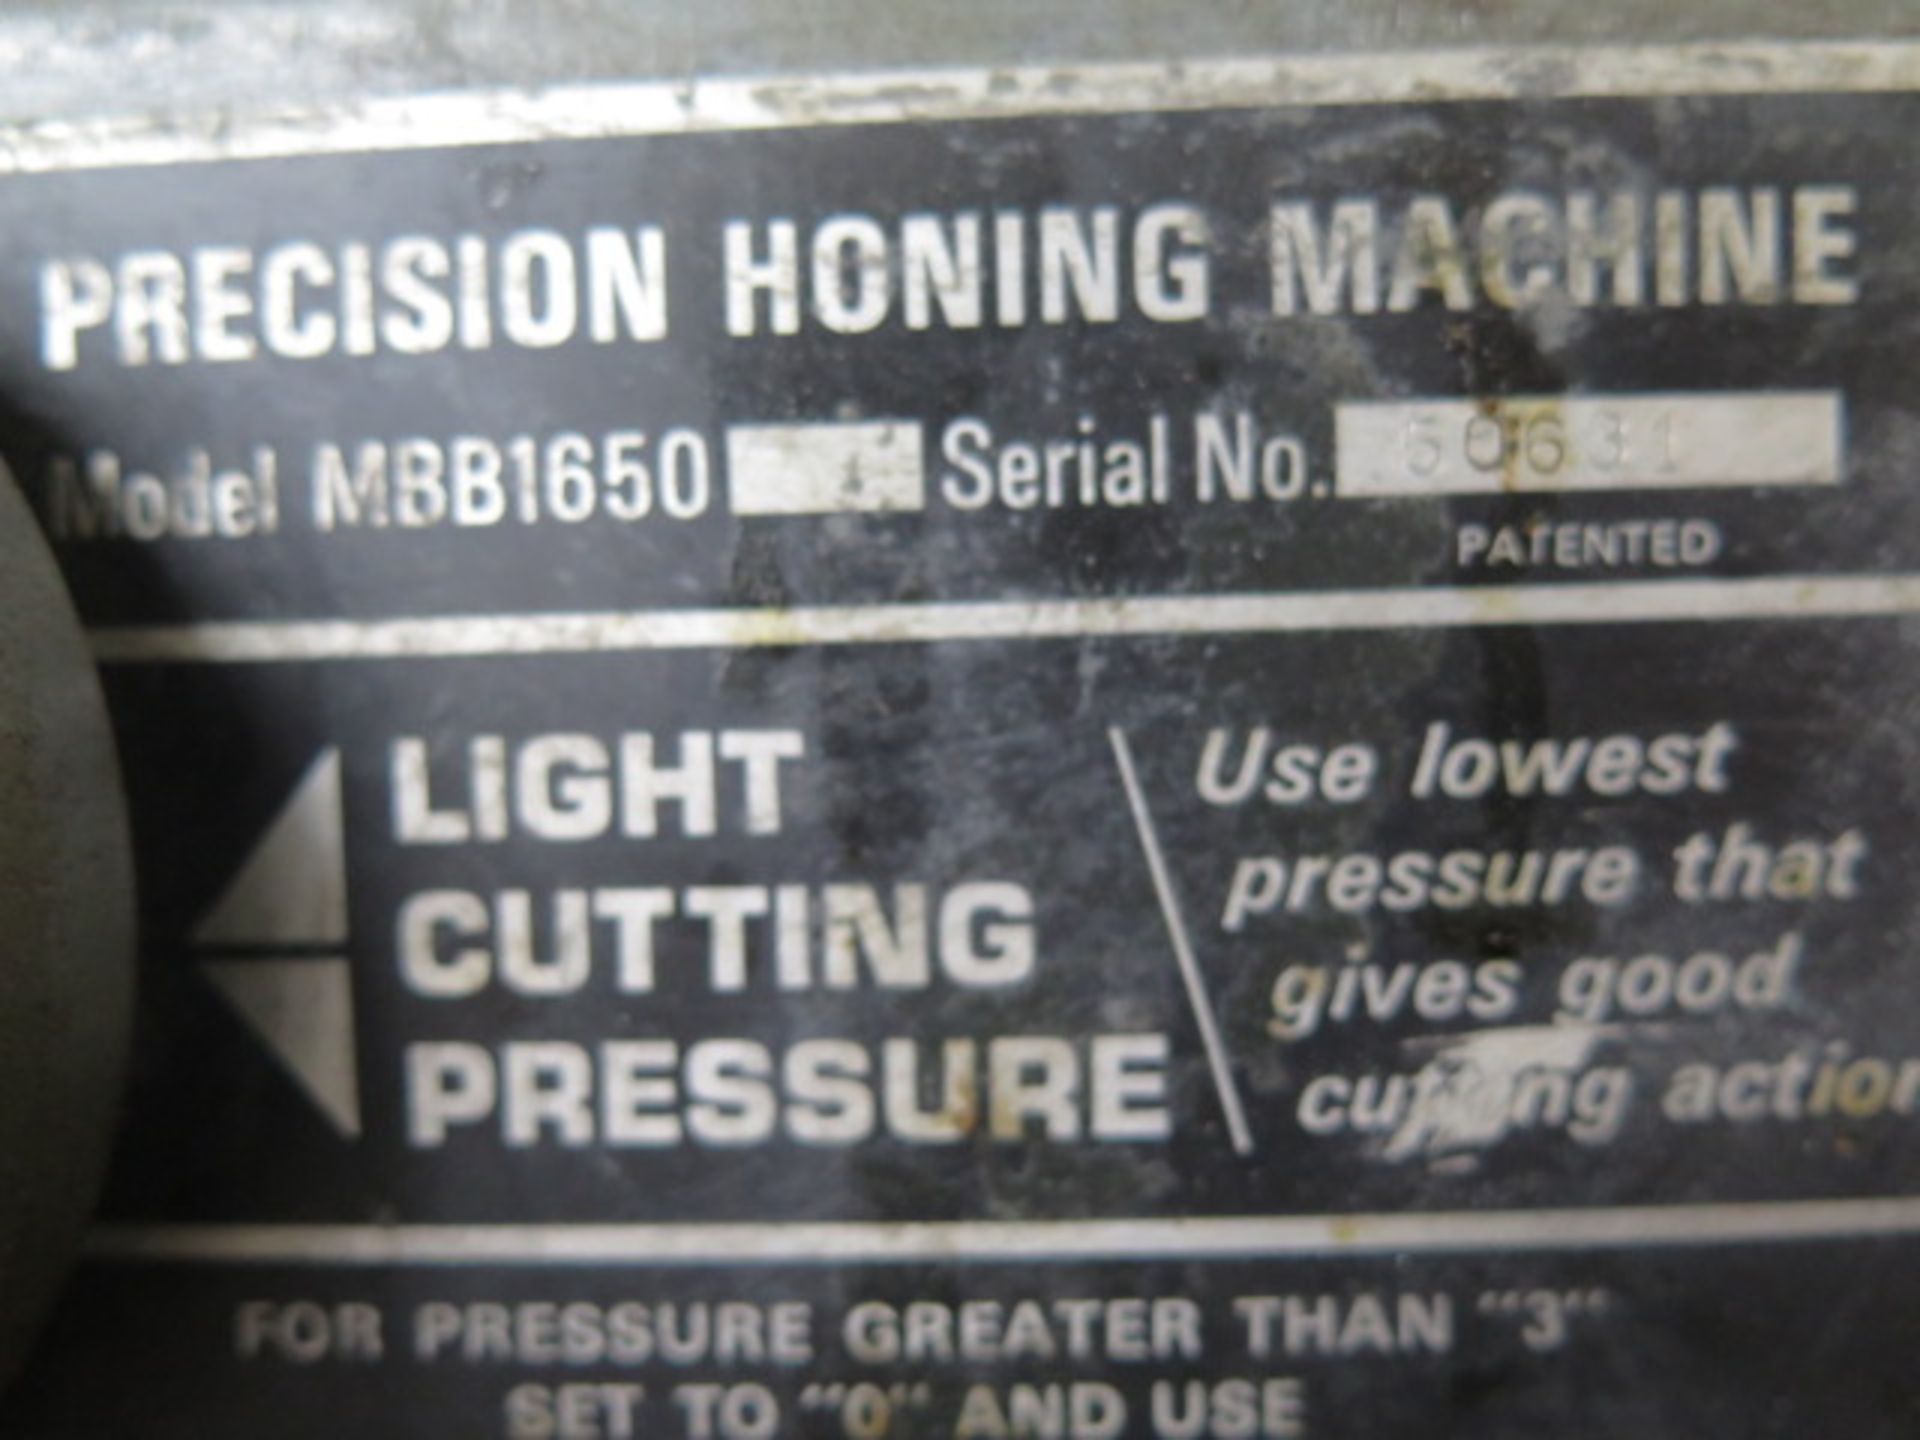 Sunnen MGG-1650 Precision Honing Machine s/n 50631 w/ 12-Speeds, Coolant (SOLD AS-IS - NO WARRANTY) - Image 6 of 6